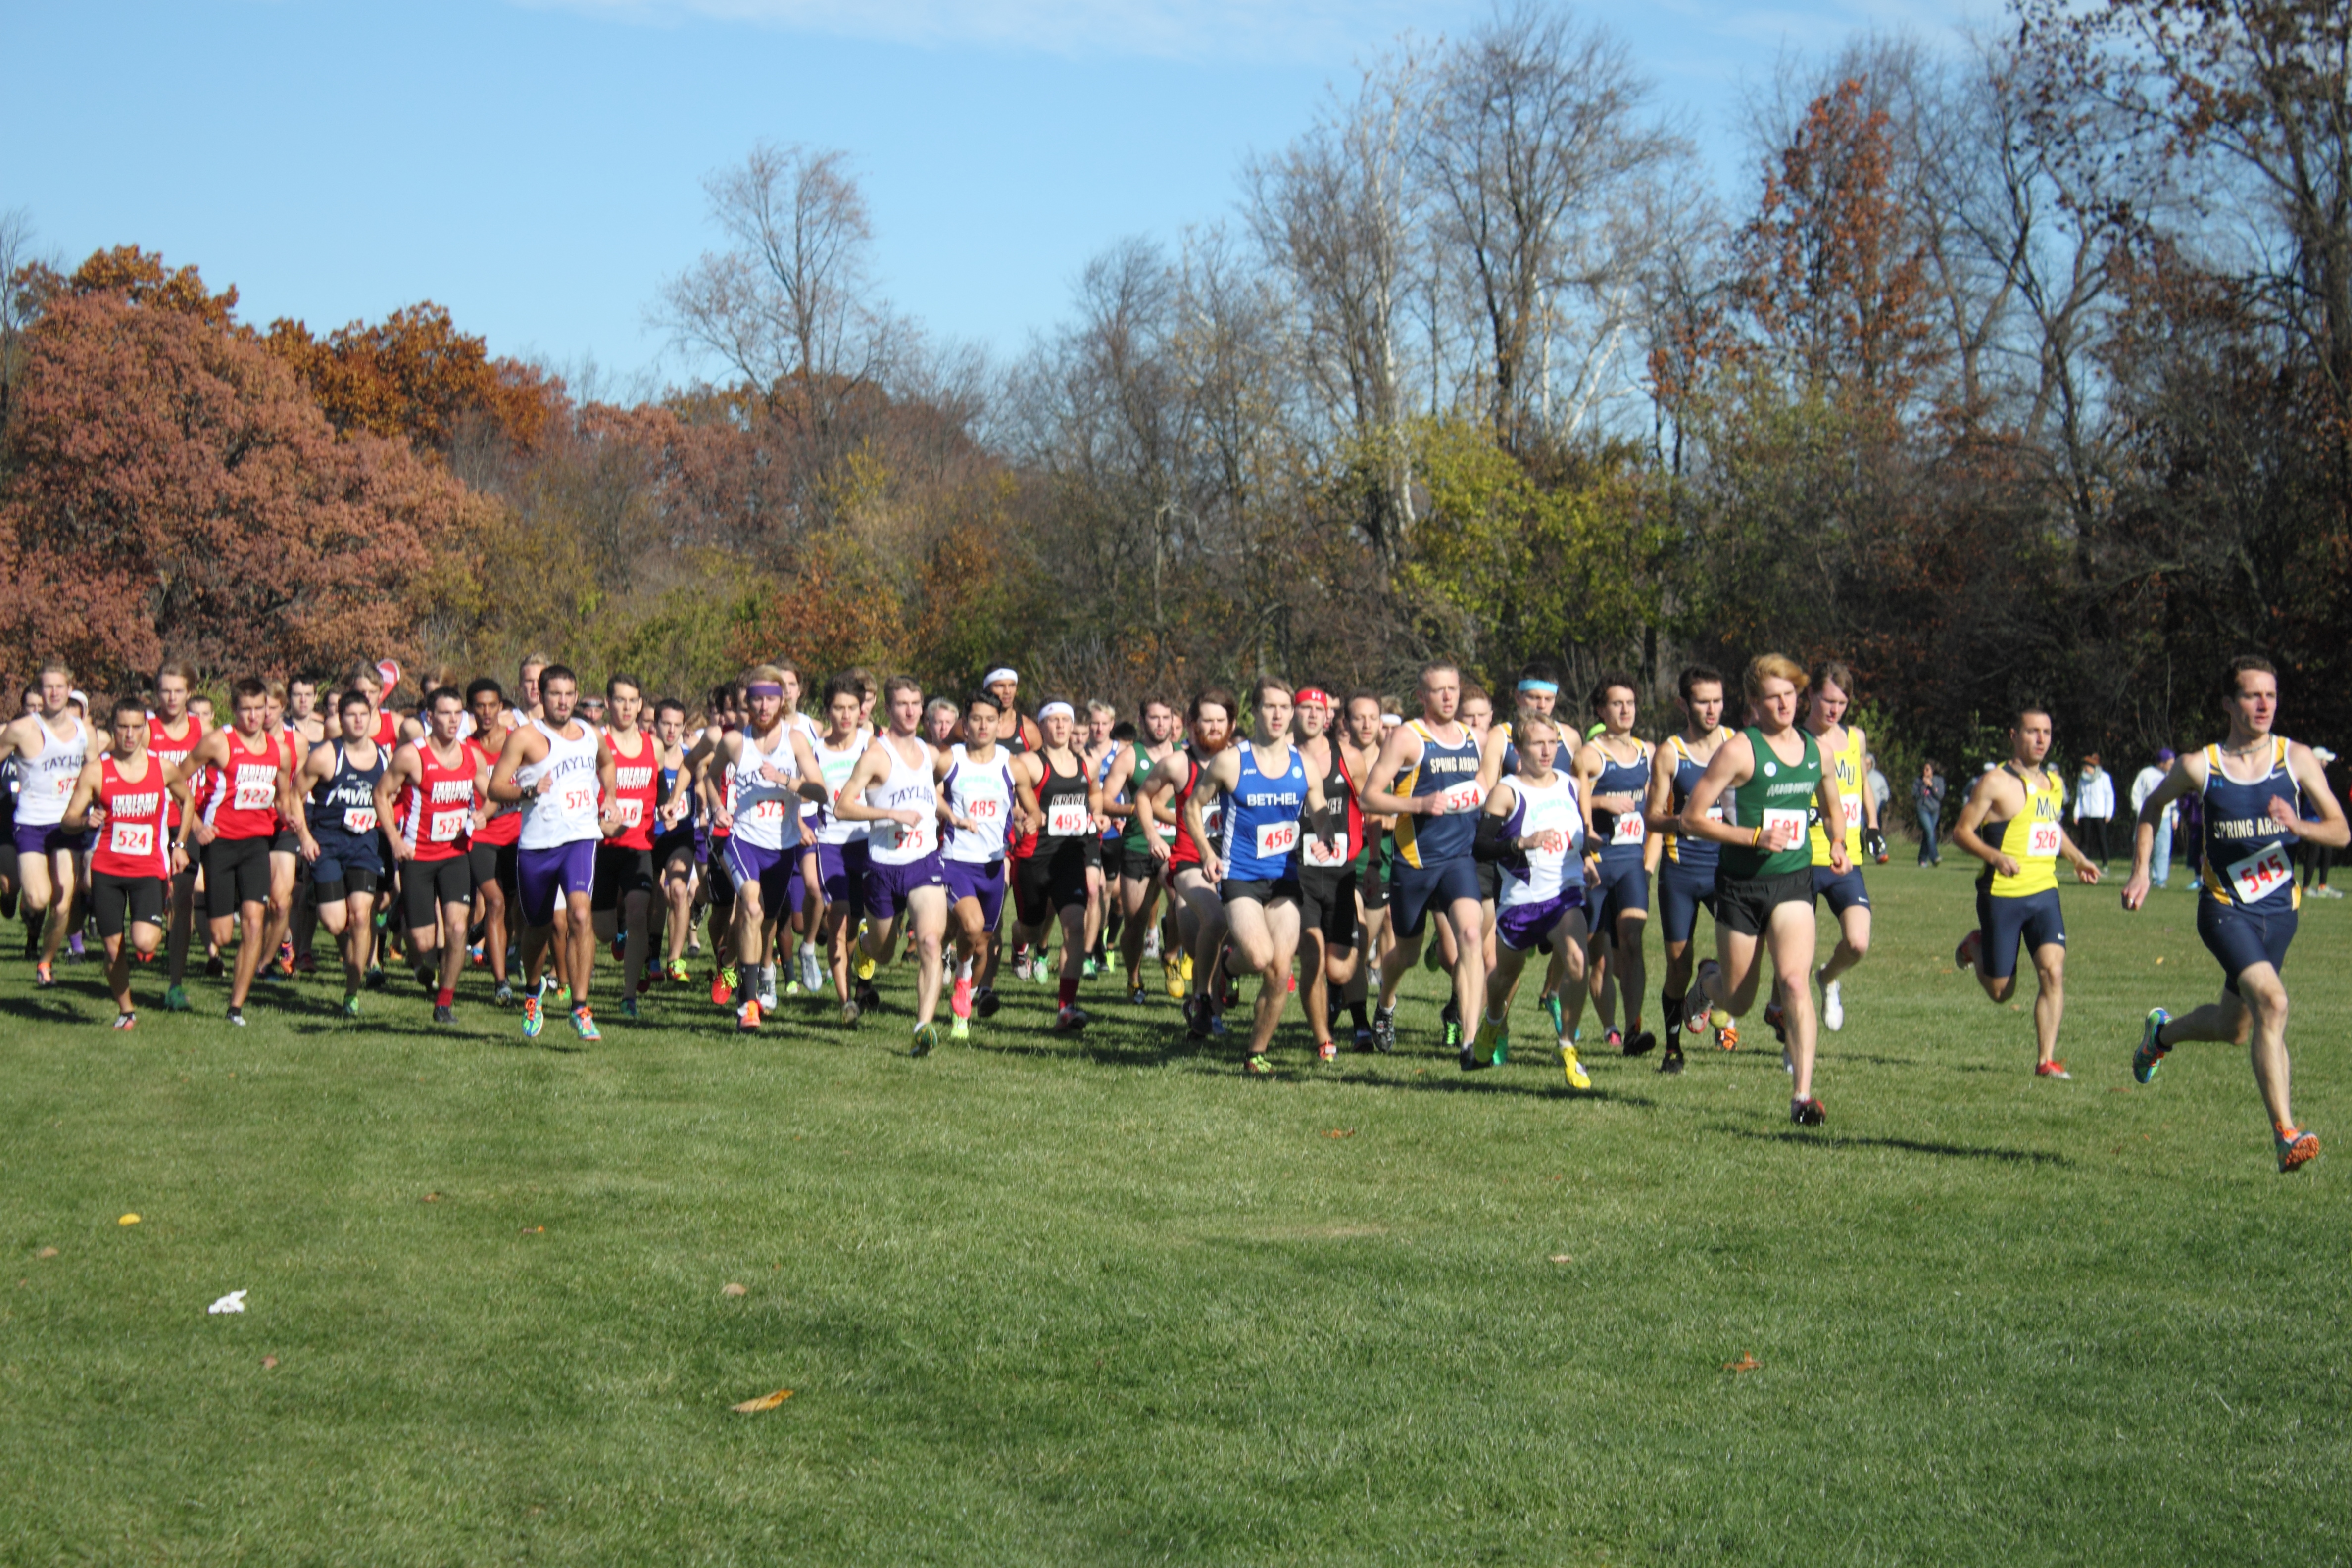 A large crowd of runners advance from the starting line at a cross country meet